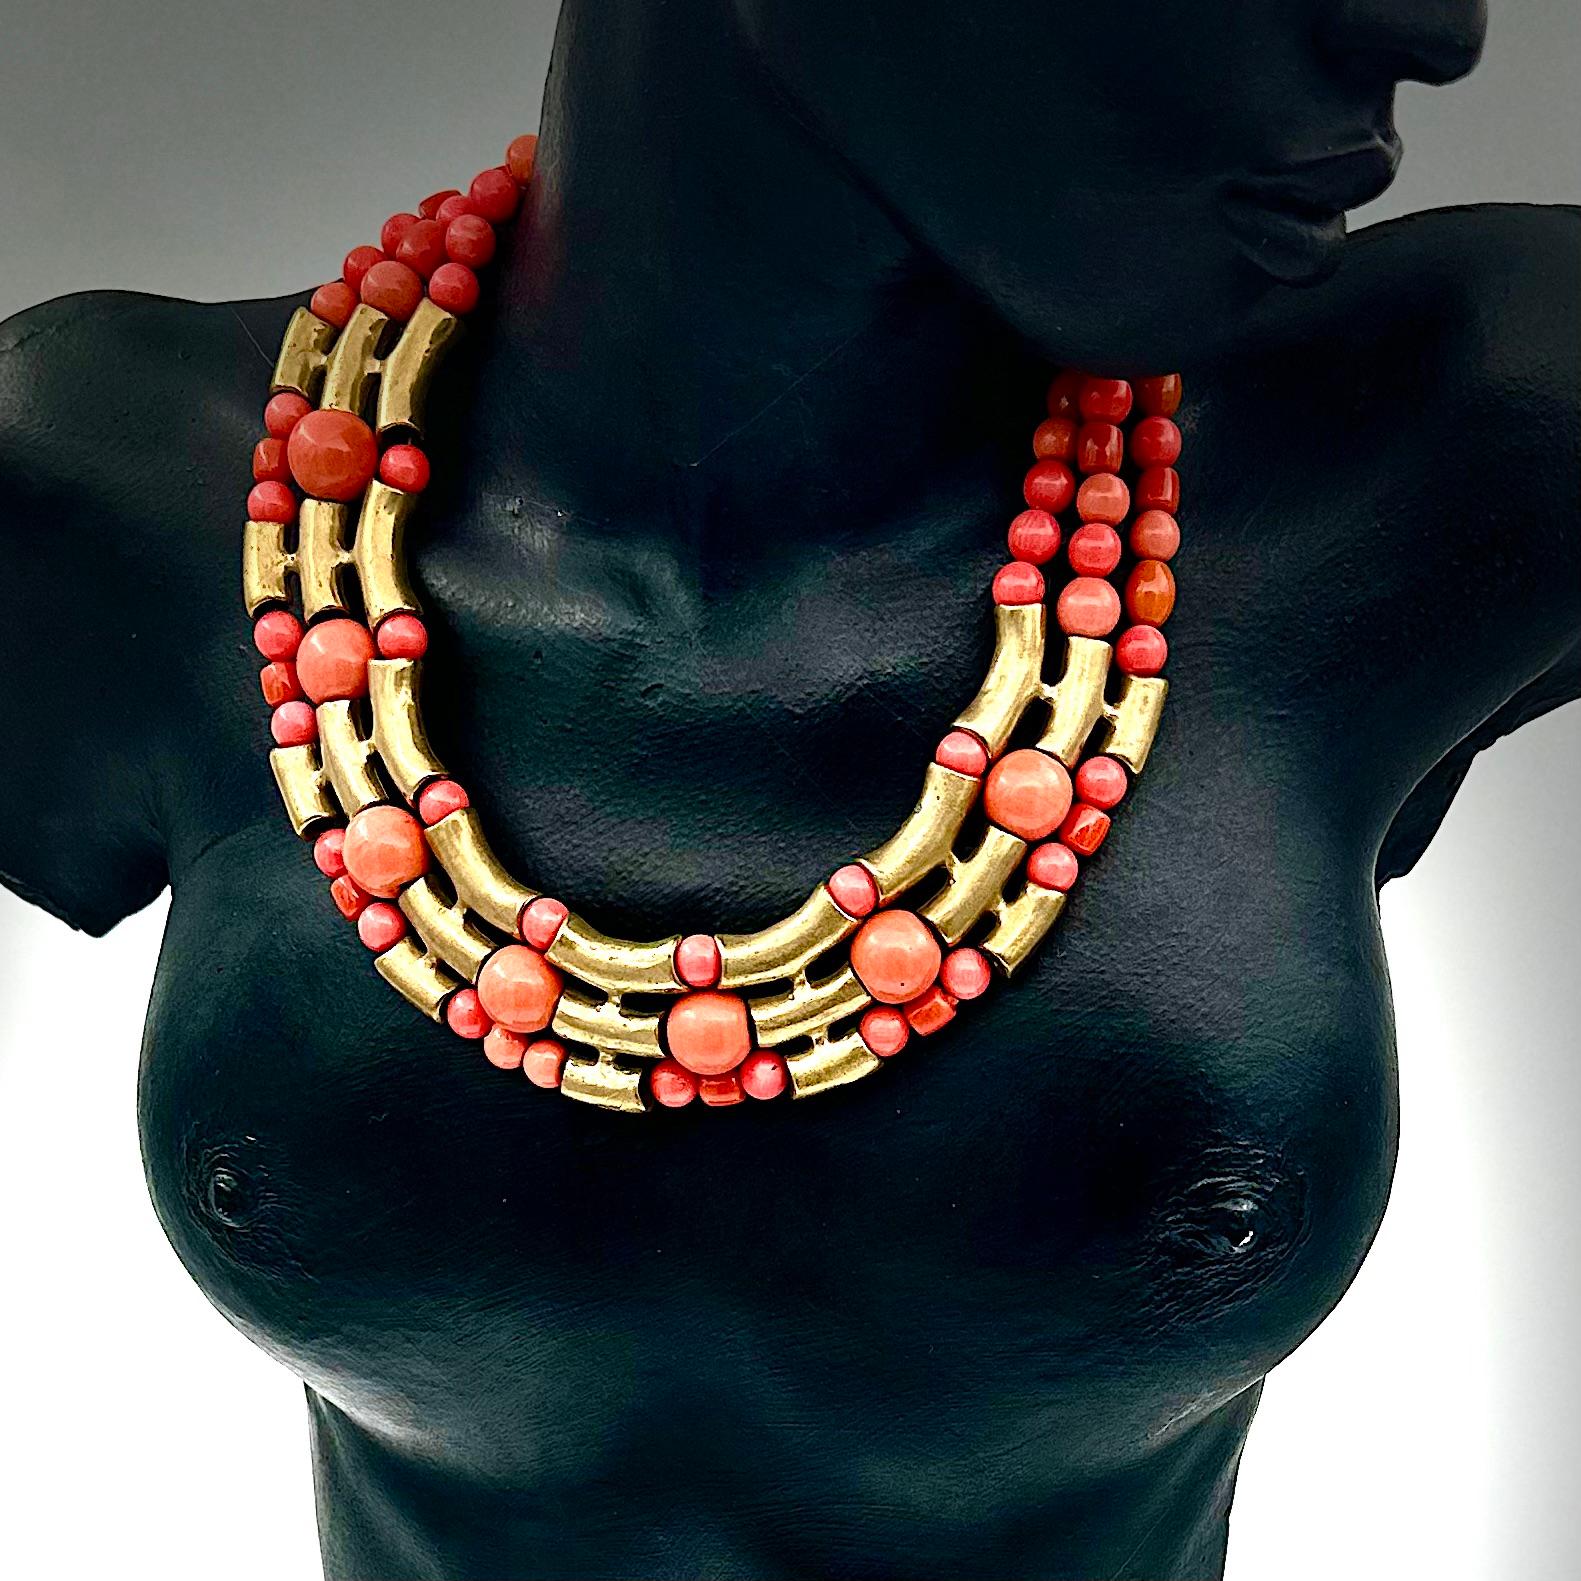 Robert Lee Morris Wabi Sabi Three Row Coral Necklace With Brass Bridges was created in 2011. The new system Morris designed utilized these sculpted and graduated tubular sections that acted as stations that defined and shaped the beads. These are